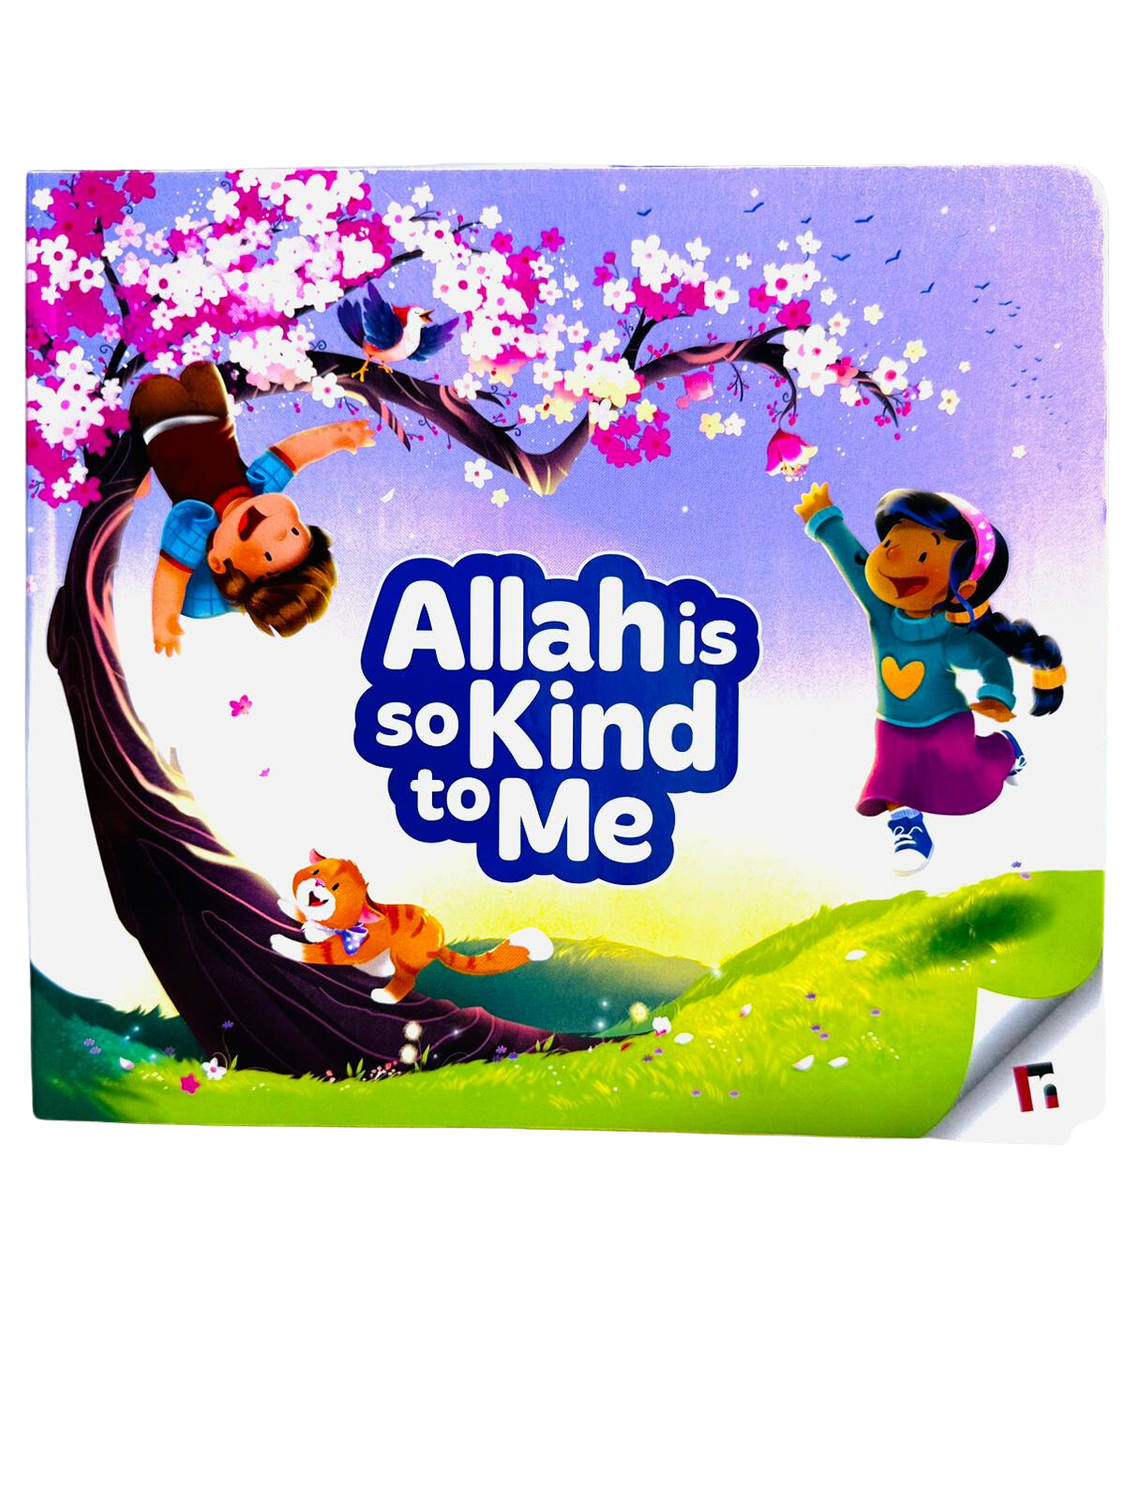 Allah is So Kind to Me